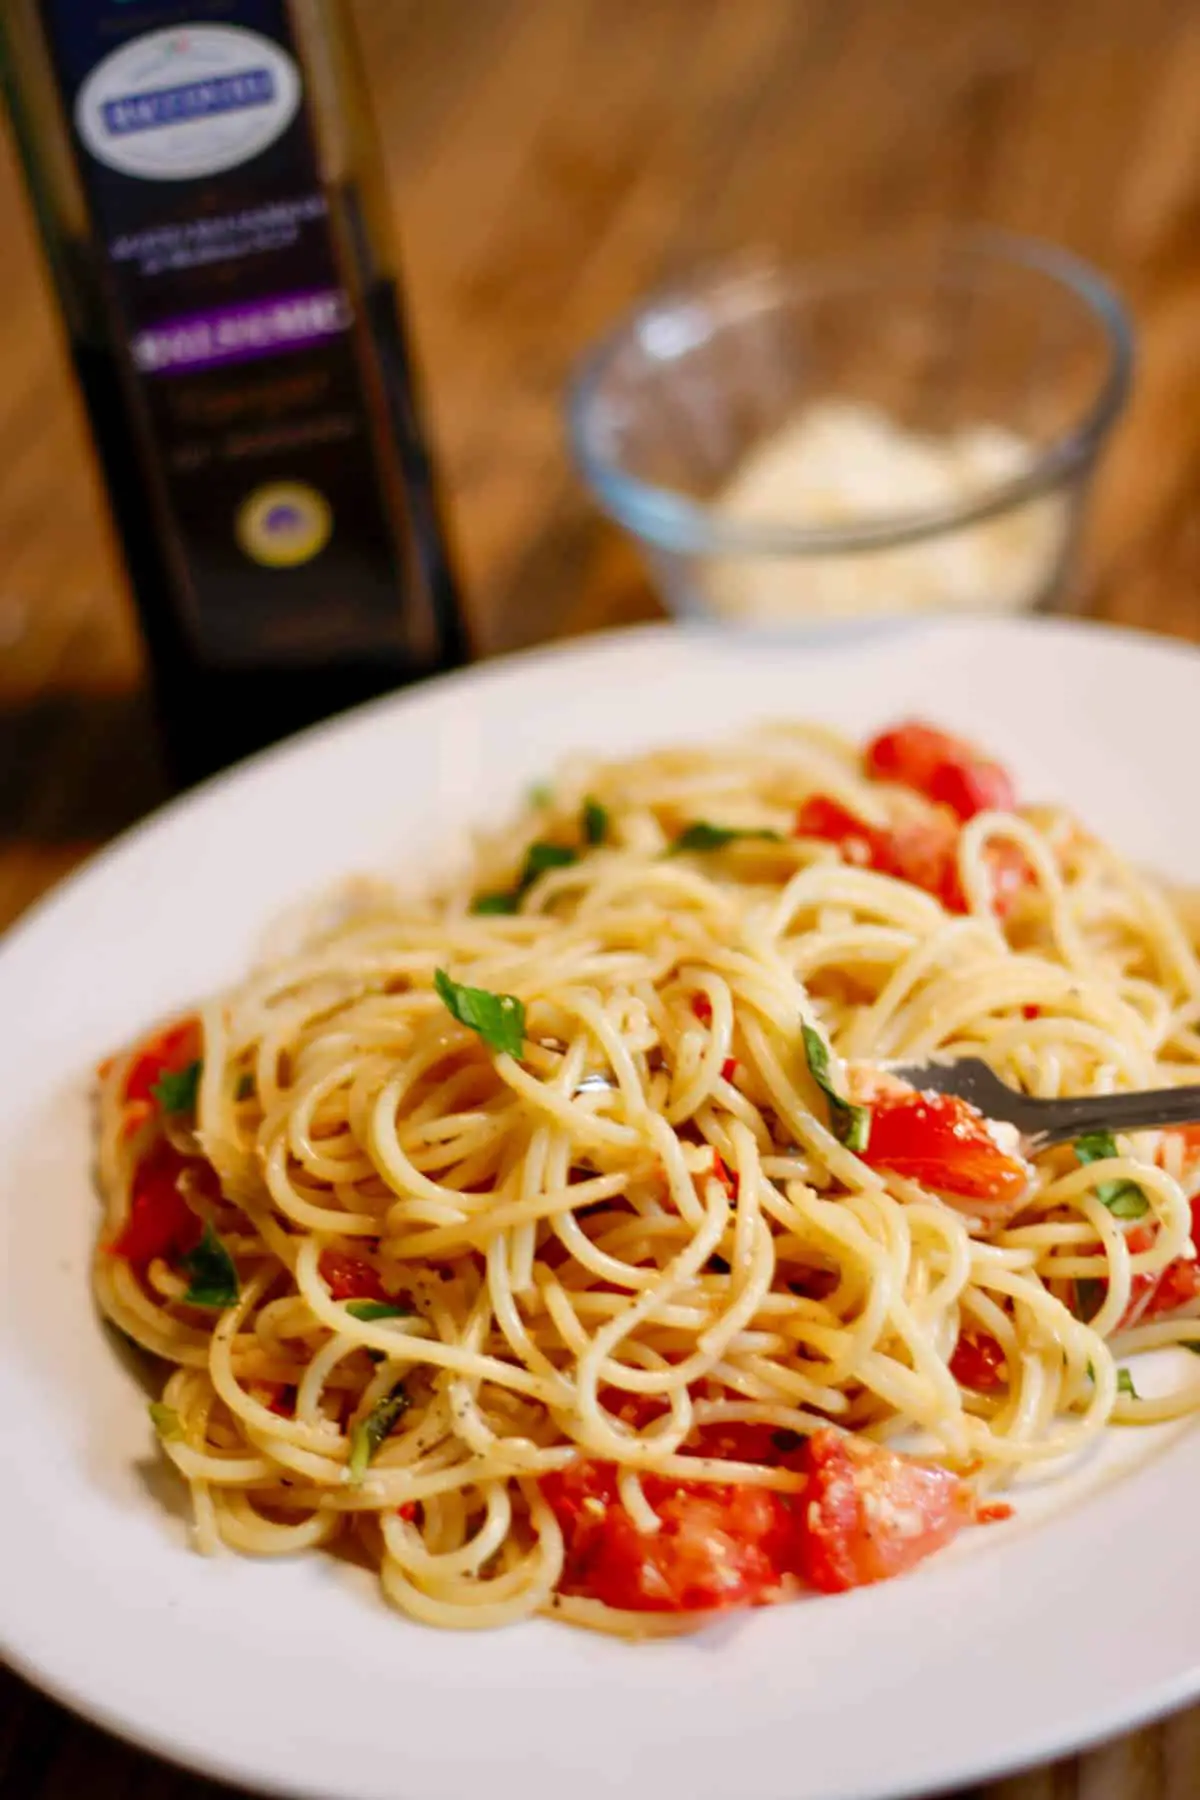 A white plate containing Pasta Alla Checca which is spaghetti with basil, tomatoes, and garlic. There is a fork inserted into the pasta and a bottle of Balsamic vinegar and bowl with Parmesan in the background.